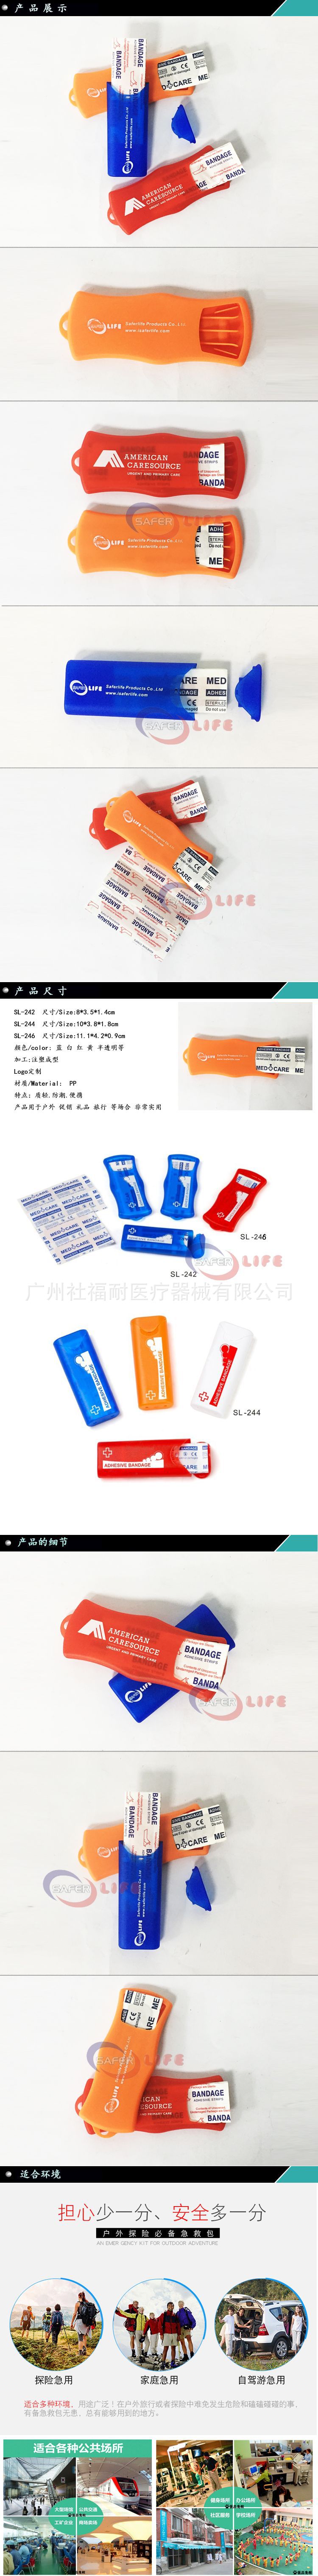 Plastic promotional gifts Key chain box Personal care Adhesive bandage box 5 piece hemostatic patch box Wholesale by manufacturers